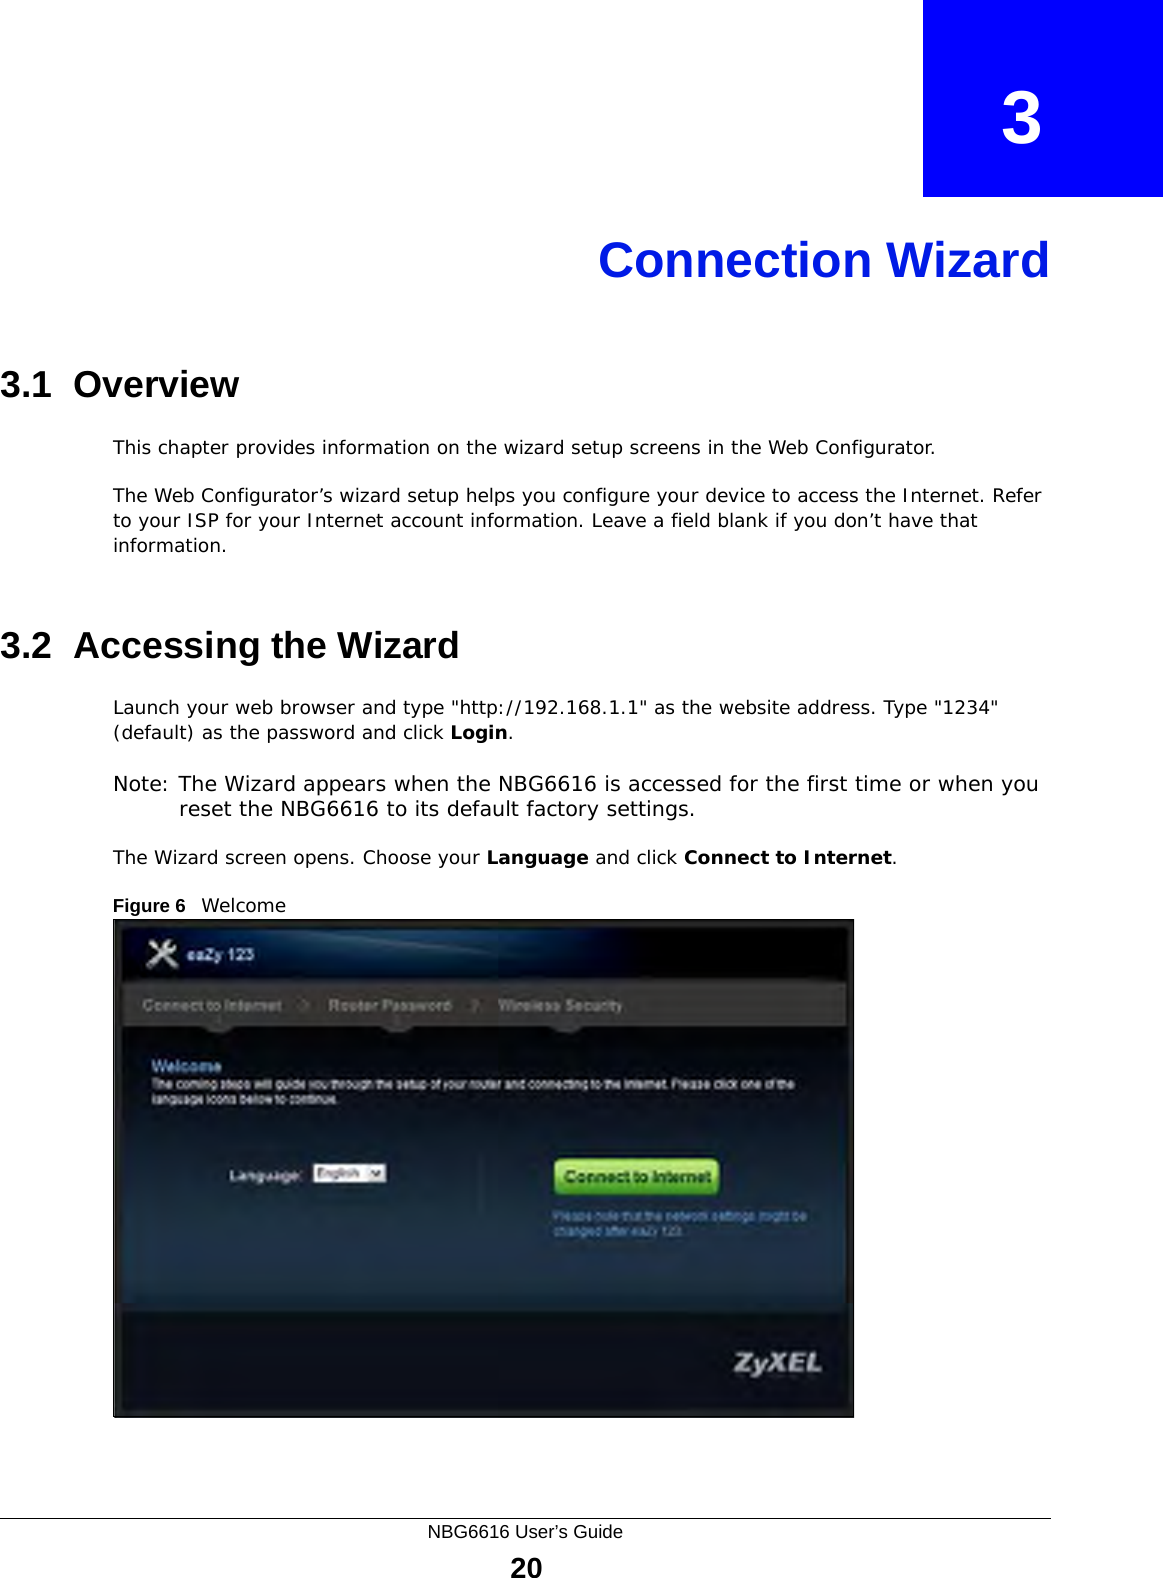 NBG6616 User’s Guide20CHAPTER   3Connection Wizard3.1  OverviewThis chapter provides information on the wizard setup screens in the Web Configurator.The Web Configurator’s wizard setup helps you configure your device to access the Internet. Refer to your ISP for your Internet account information. Leave a field blank if you don’t have that information.3.2  Accessing the WizardLaunch your web browser and type &quot;http://192.168.1.1&quot; as the website address. Type &quot;1234&quot; (default) as the password and click Login.Note: The Wizard appears when the NBG6616 is accessed for the first time or when you reset the NBG6616 to its default factory settings.The Wizard screen opens. Choose your Language and click Connect to Internet.Figure 6   Welcome 